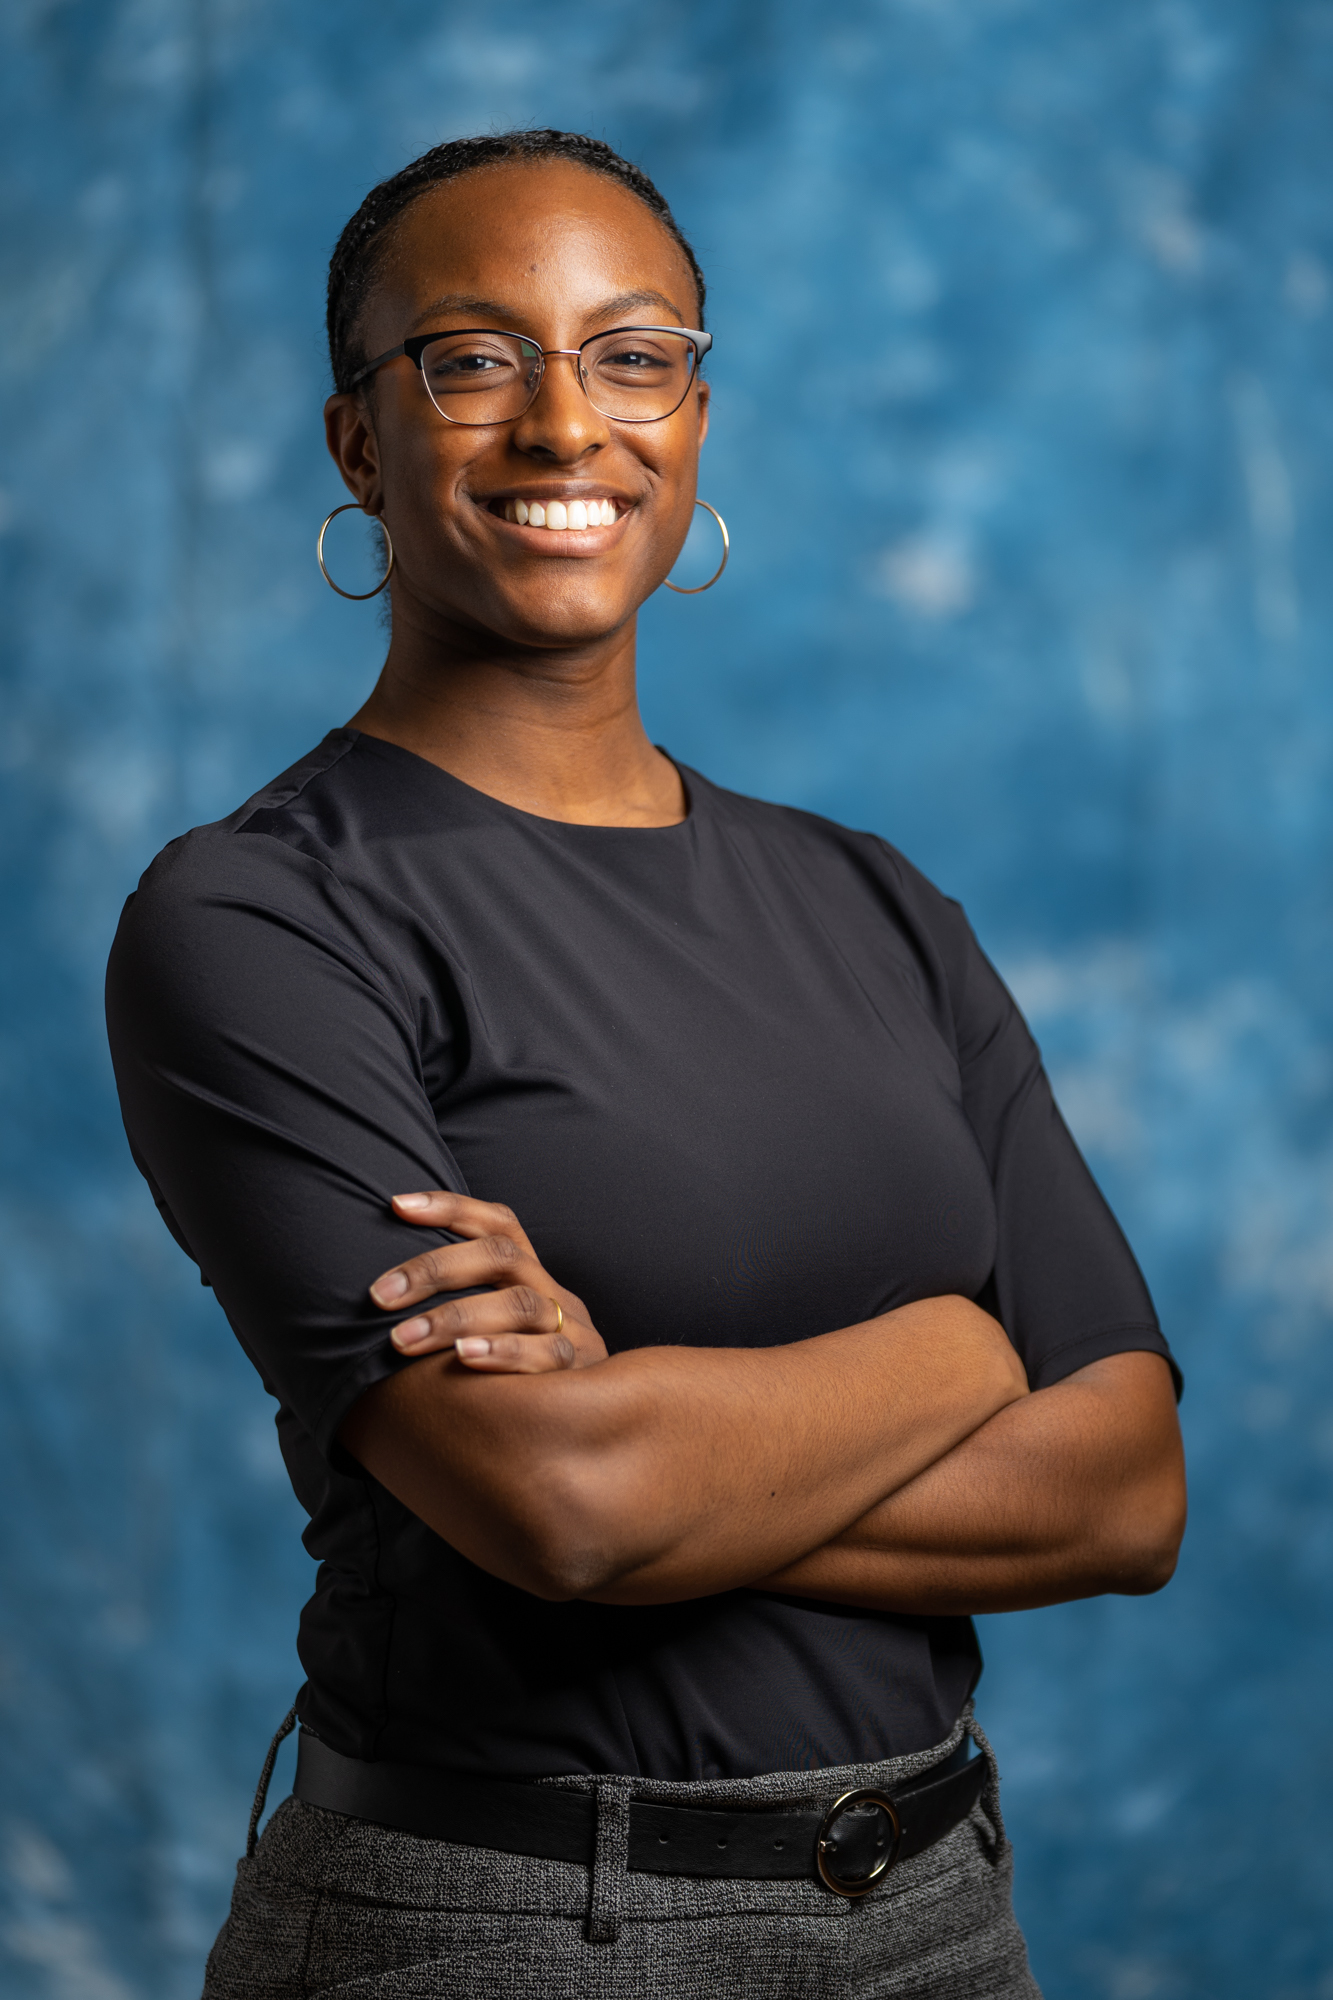 Populus Fund Grantee Jewel Rodgers smiles with arms folded against an abstract blue background